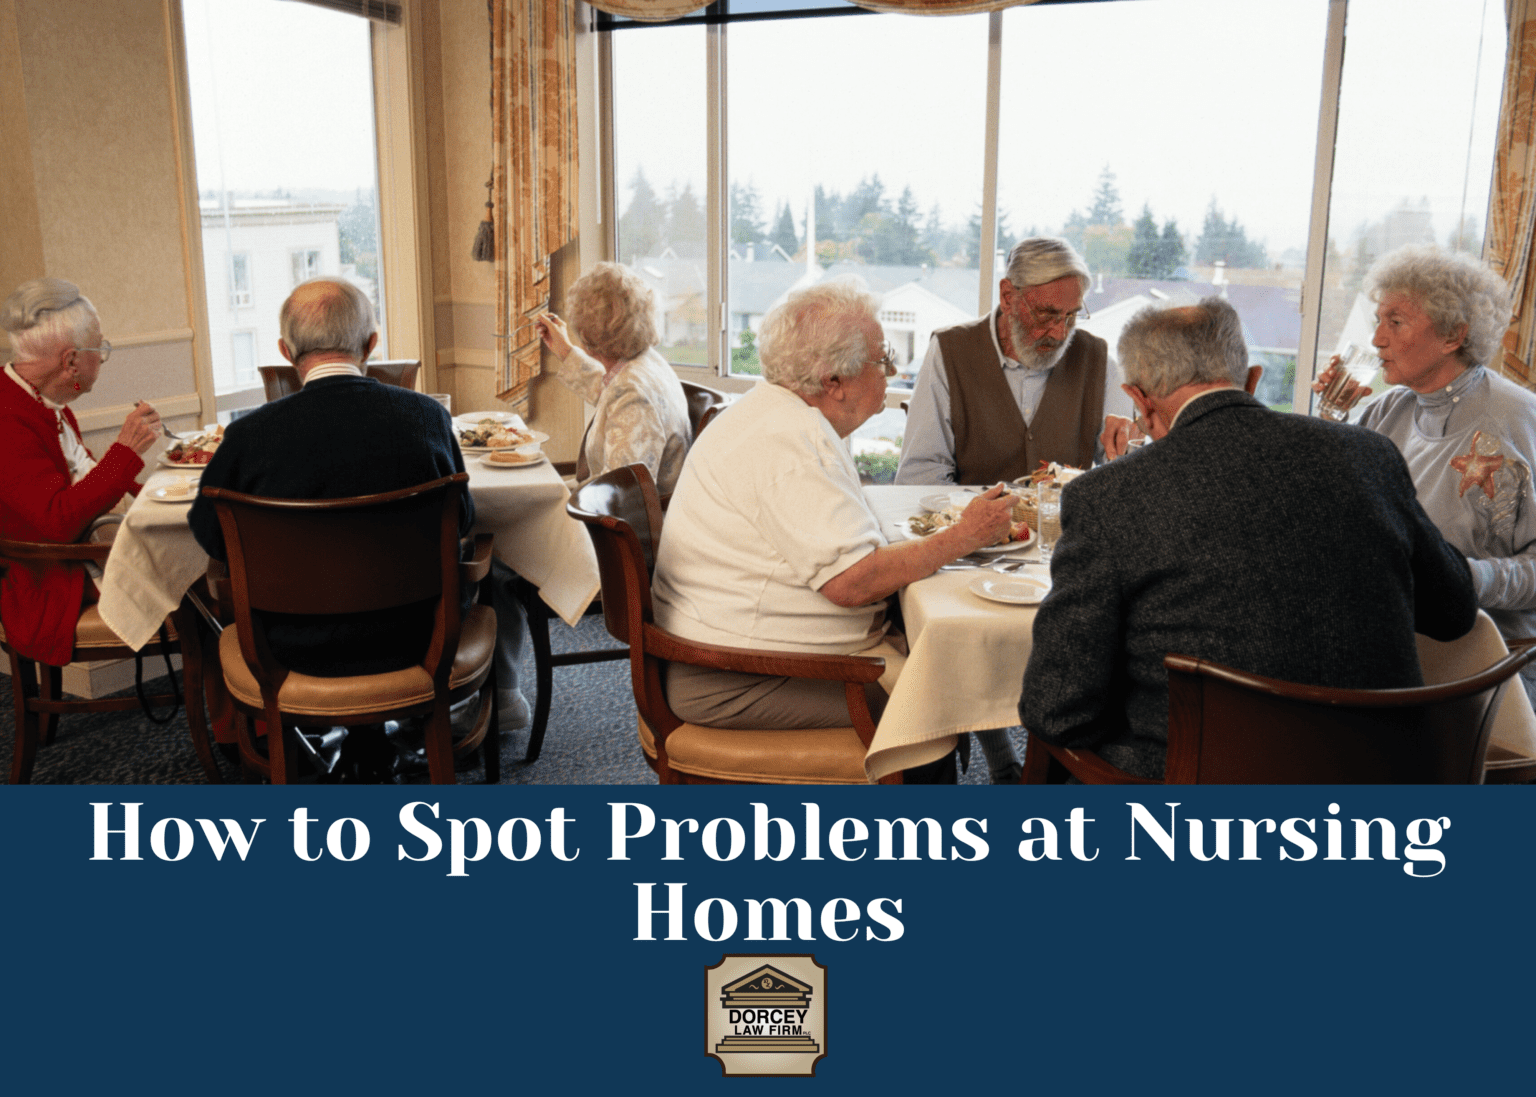 How to Spot Problems at Nursing Homes